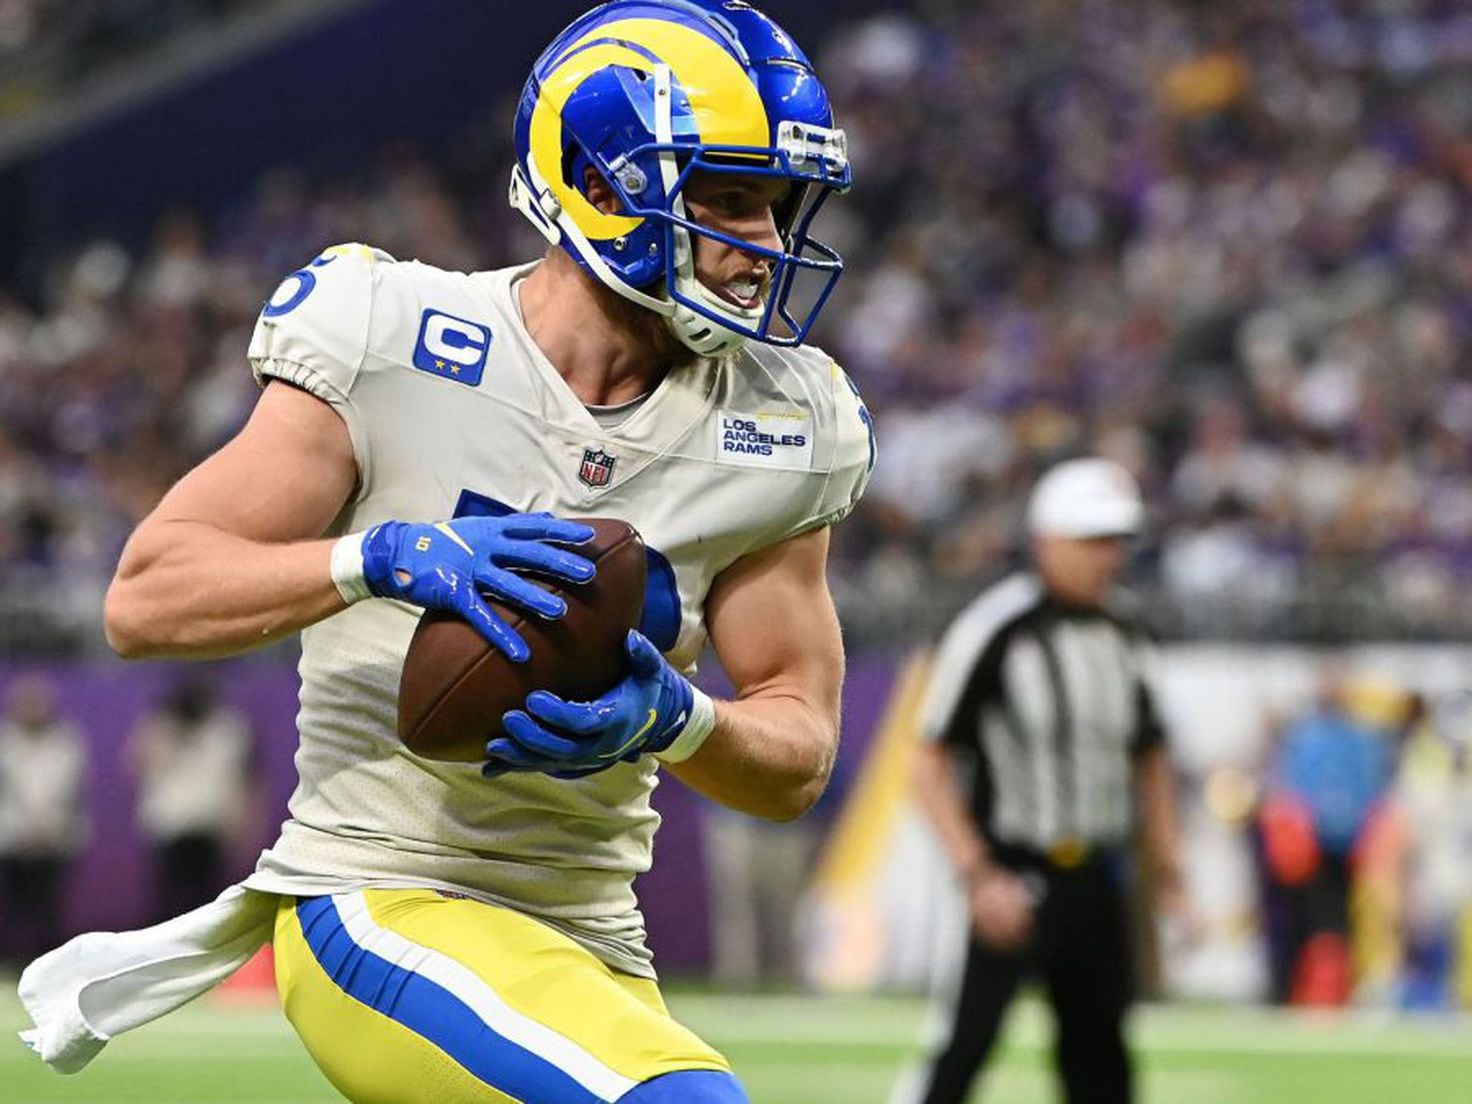 Did Cooper Kupp break the WR receiving yards record in 2021?